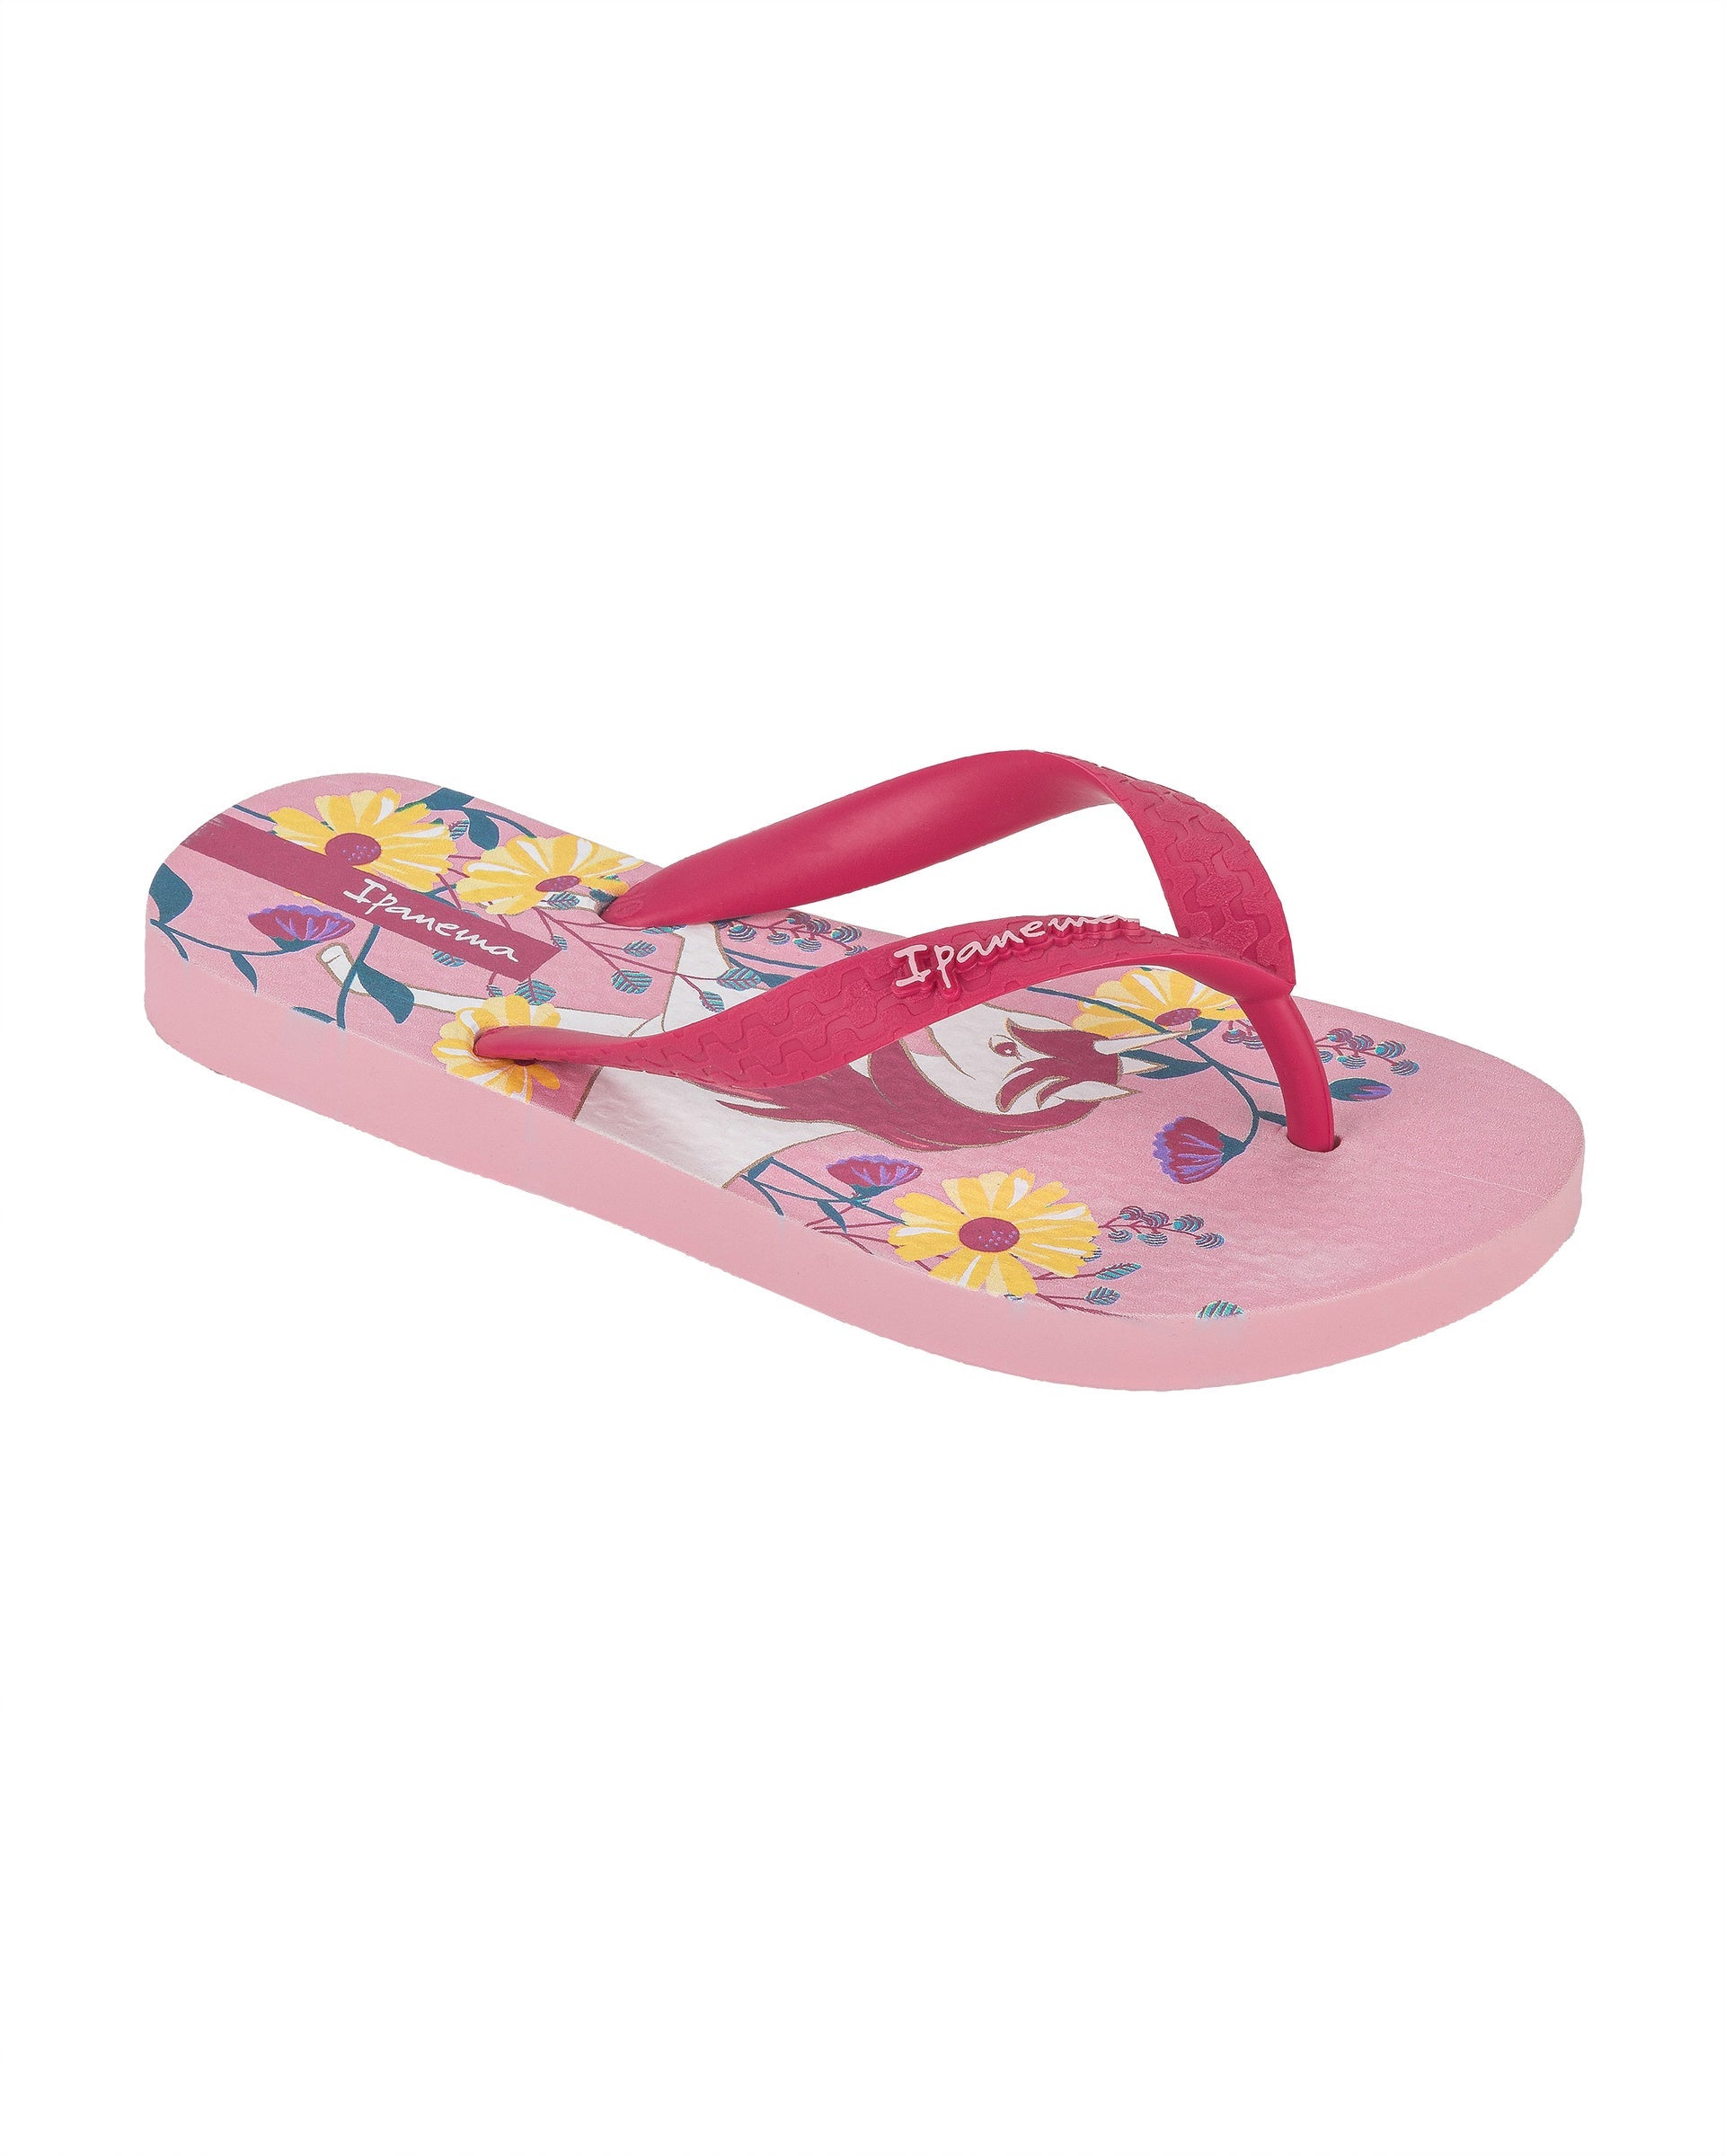 Angled view of a pink Ipanema Temas kids flip flop with unicorn and flower print.